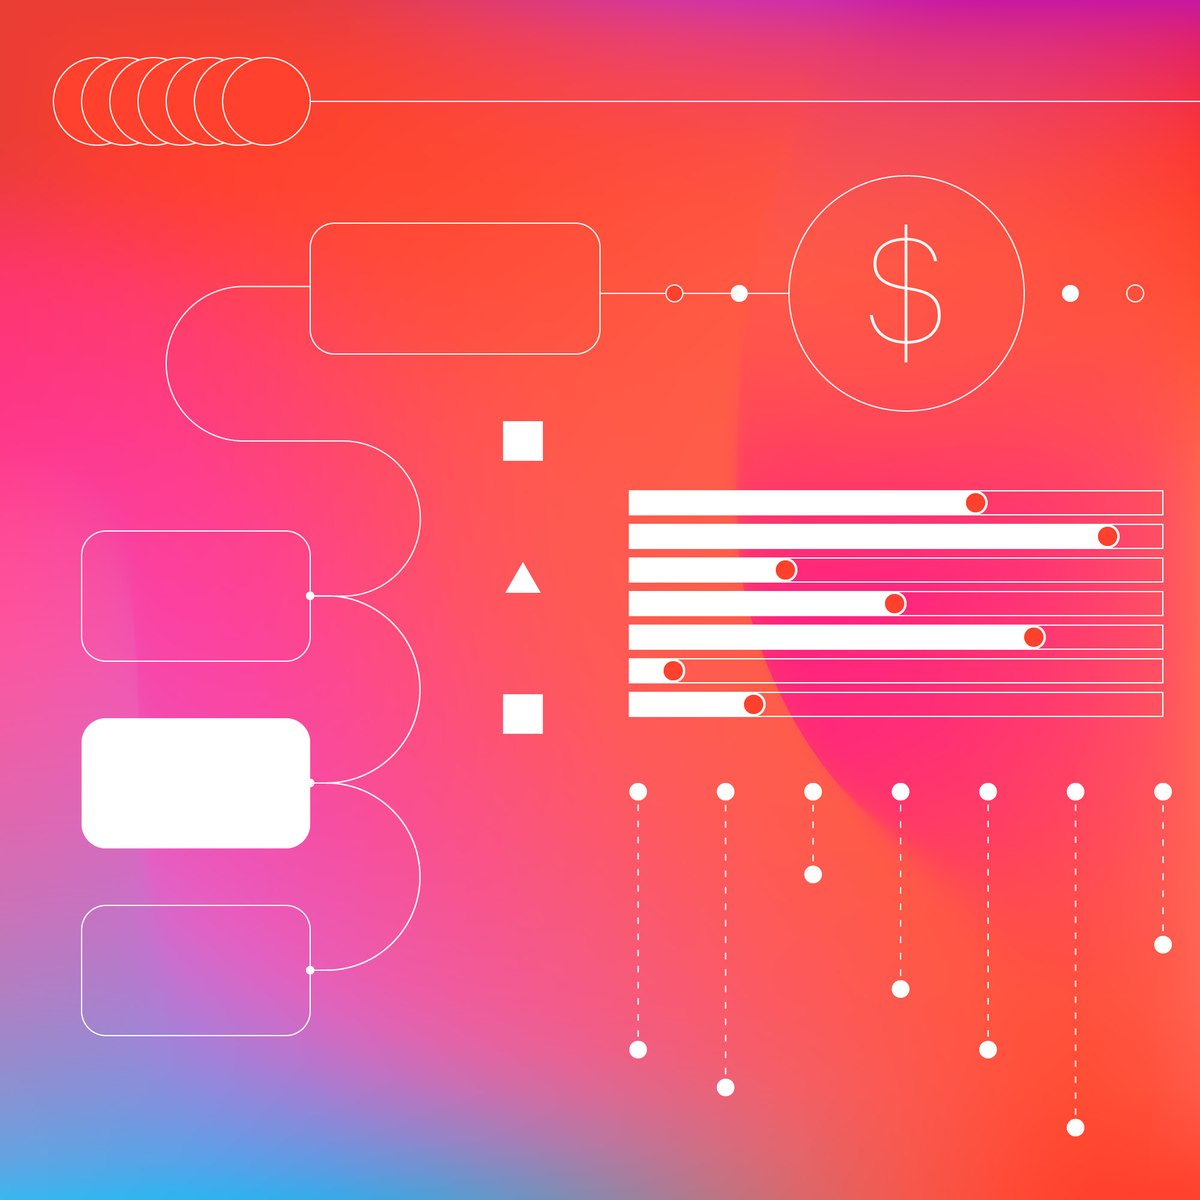 Gradient background showing multiple connected datapoints, flow charts and sliding scales, with a dollar sign in one bubble, reflecting customer spend.